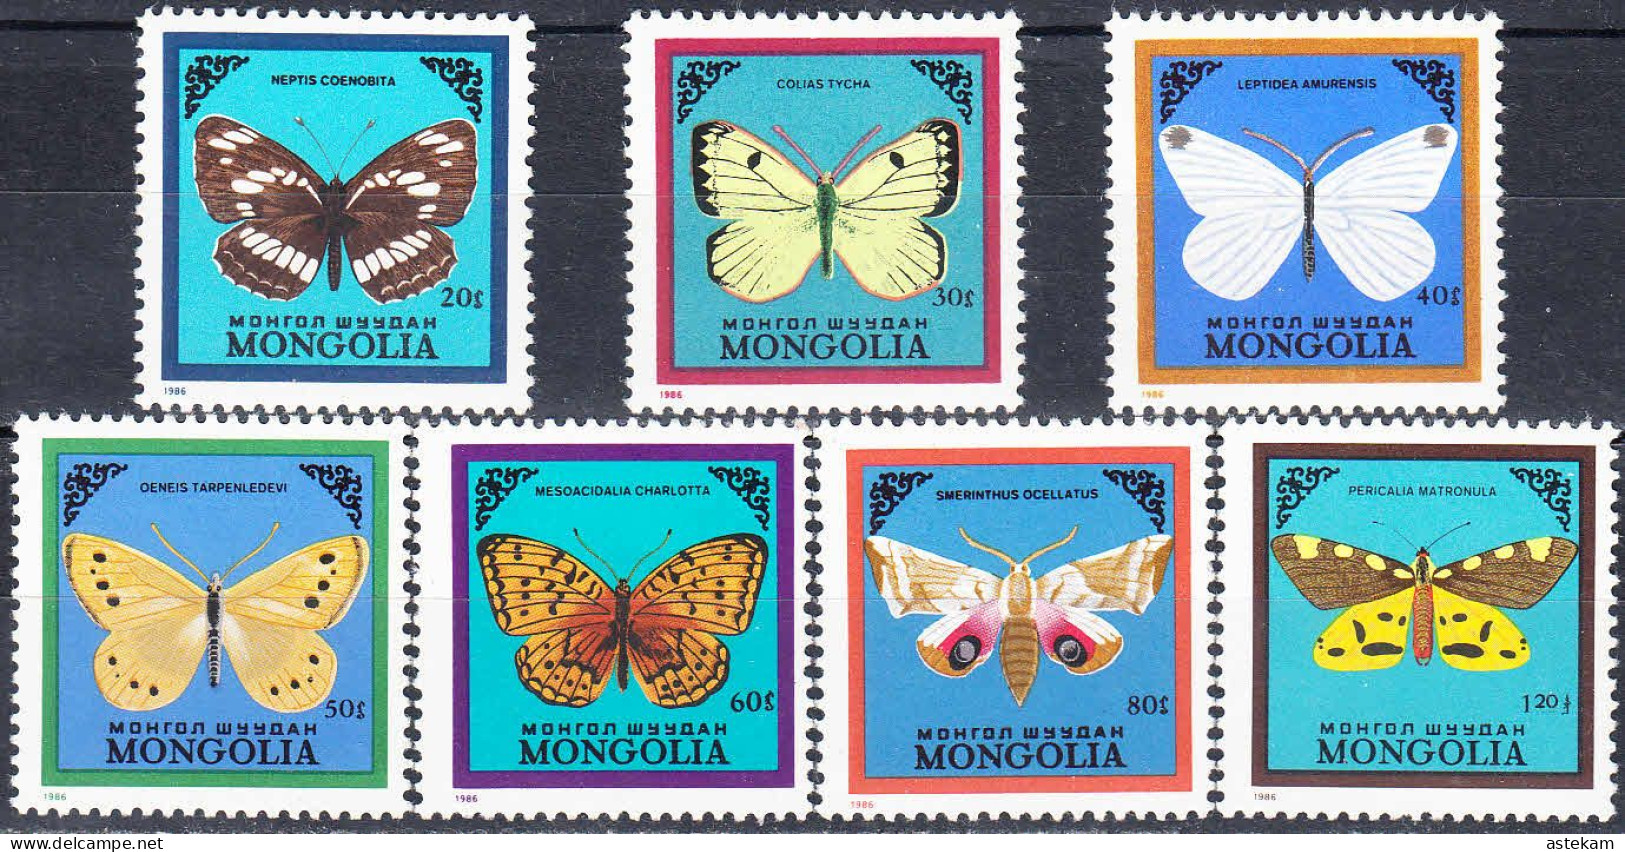 MONGOLIA 1986, FAUNA, BUTTERFLIES, COMPLETE MNH SERIES With GOOD QUALITY, *** - Mongolie